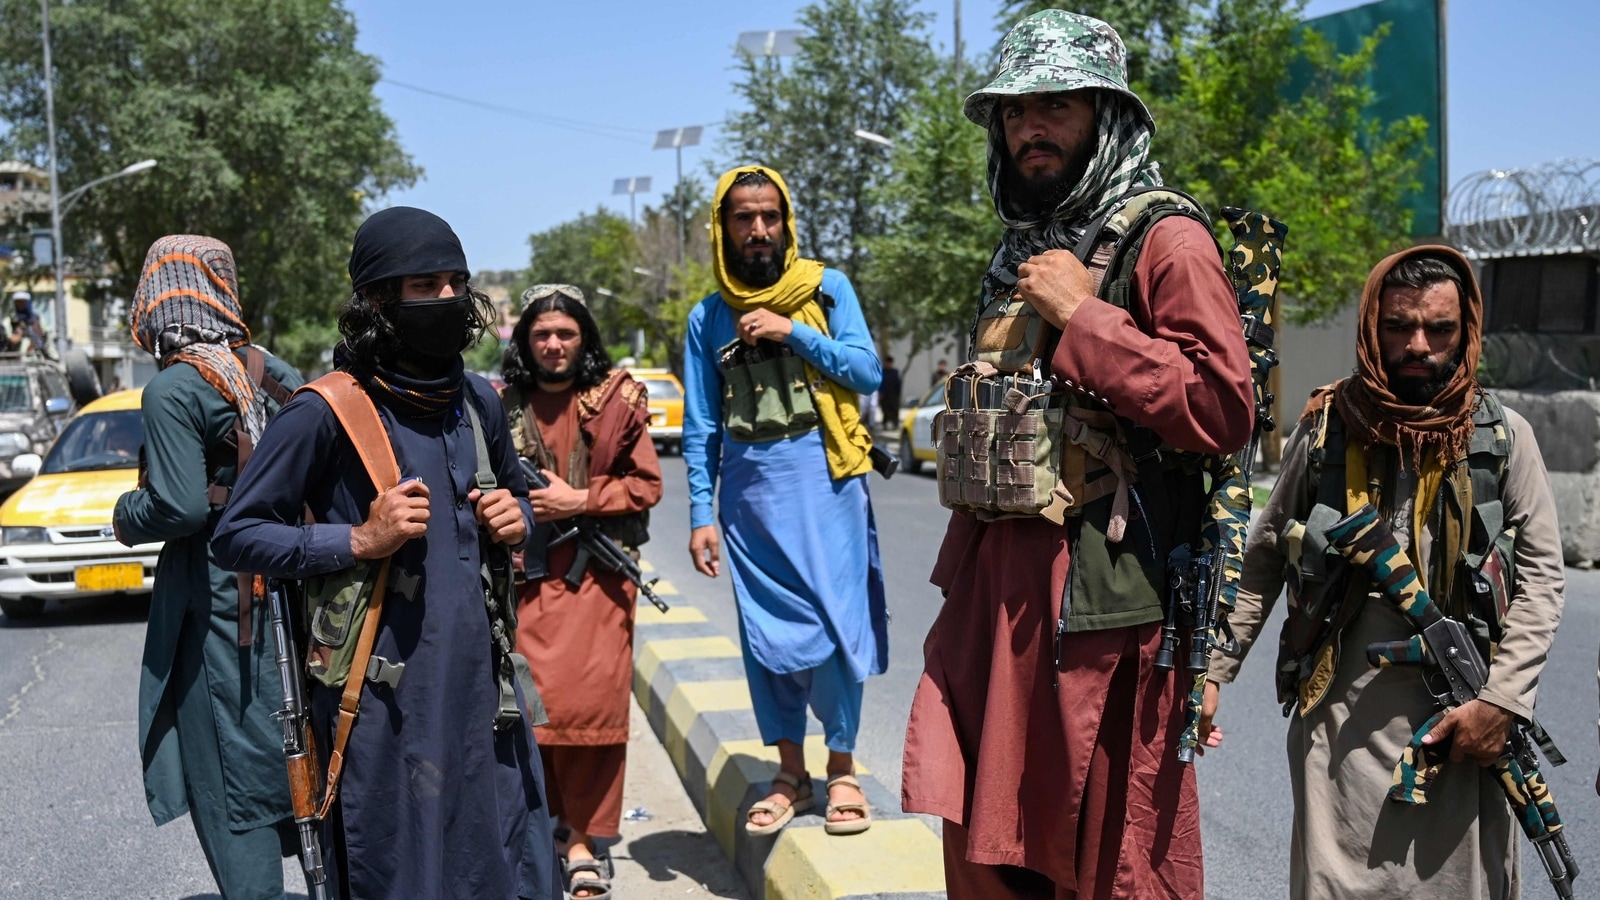 Taliban arrest 2 after 3 wedding guests killed over music in Nangarhar |  World News - Hindustan Times